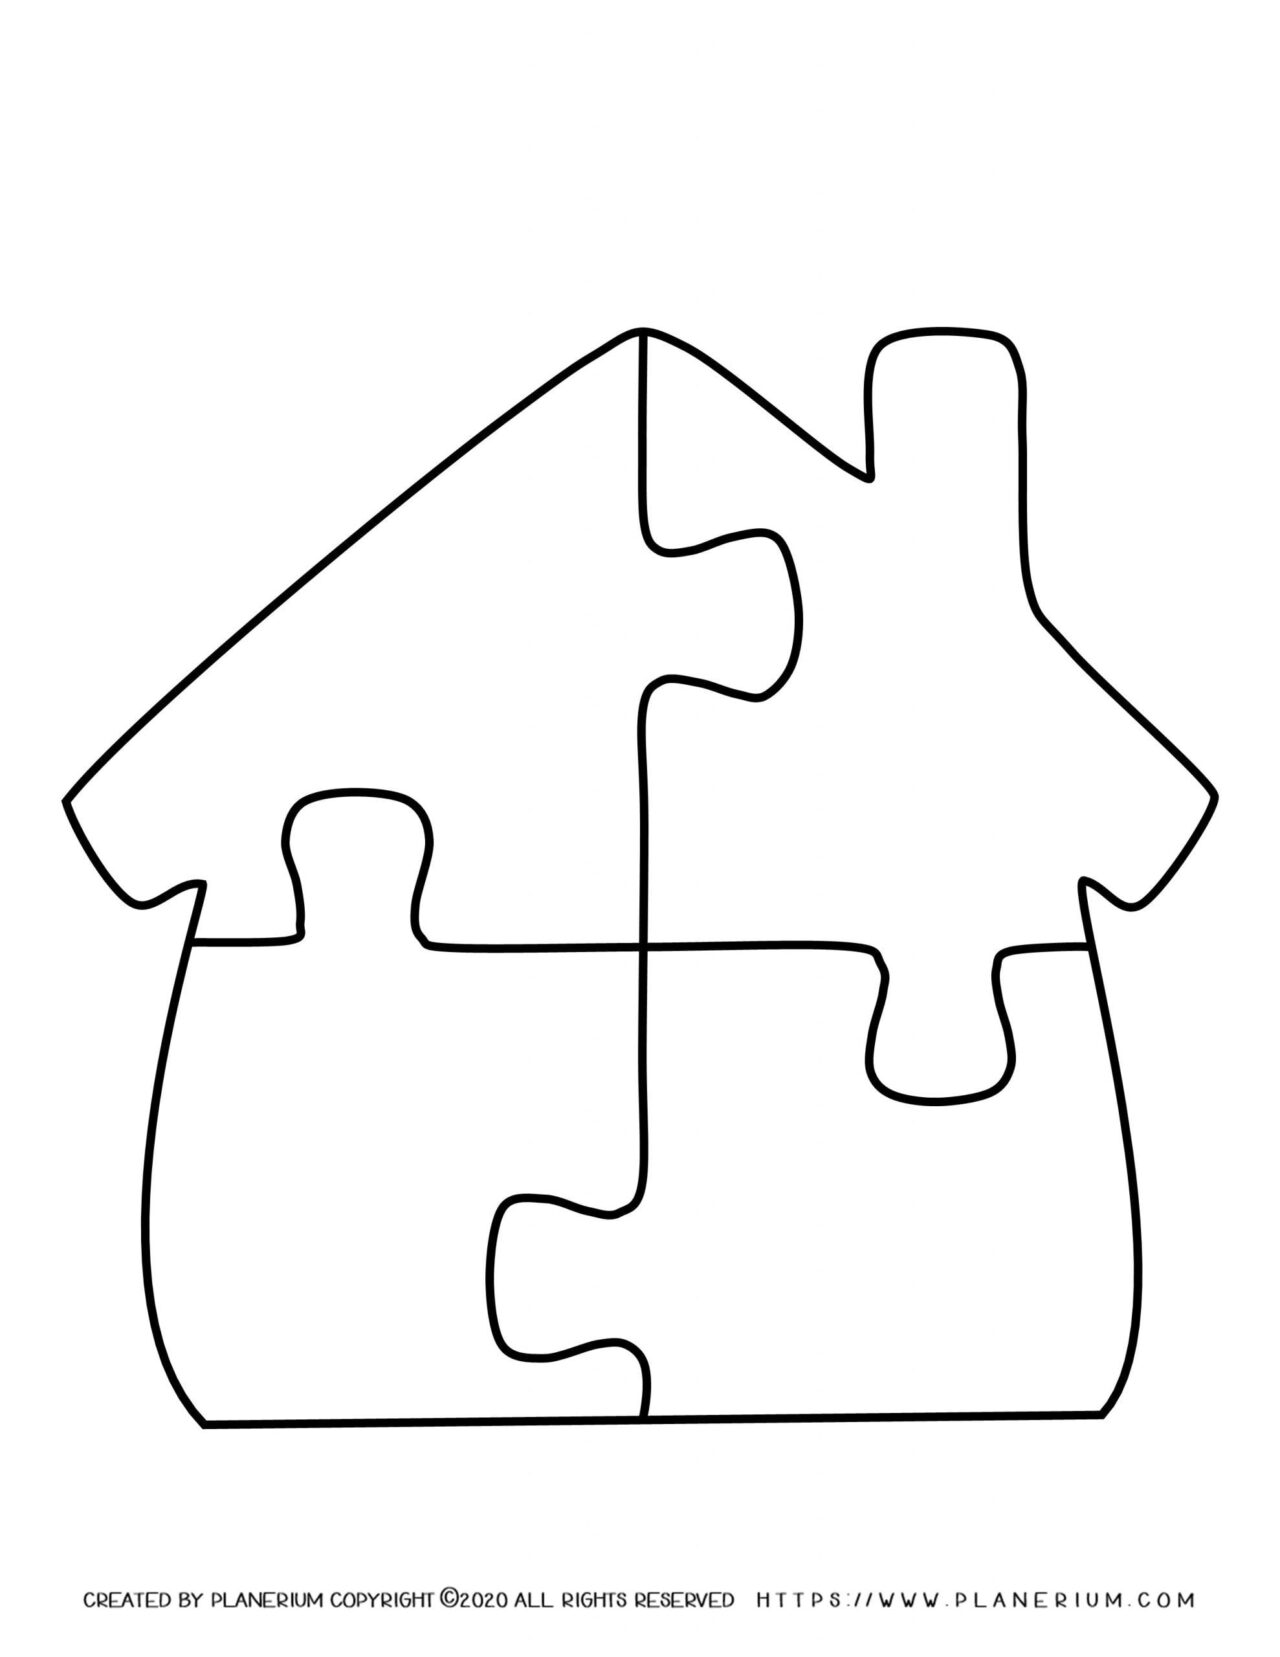 My Home - Coloring Page - Home Puzzle